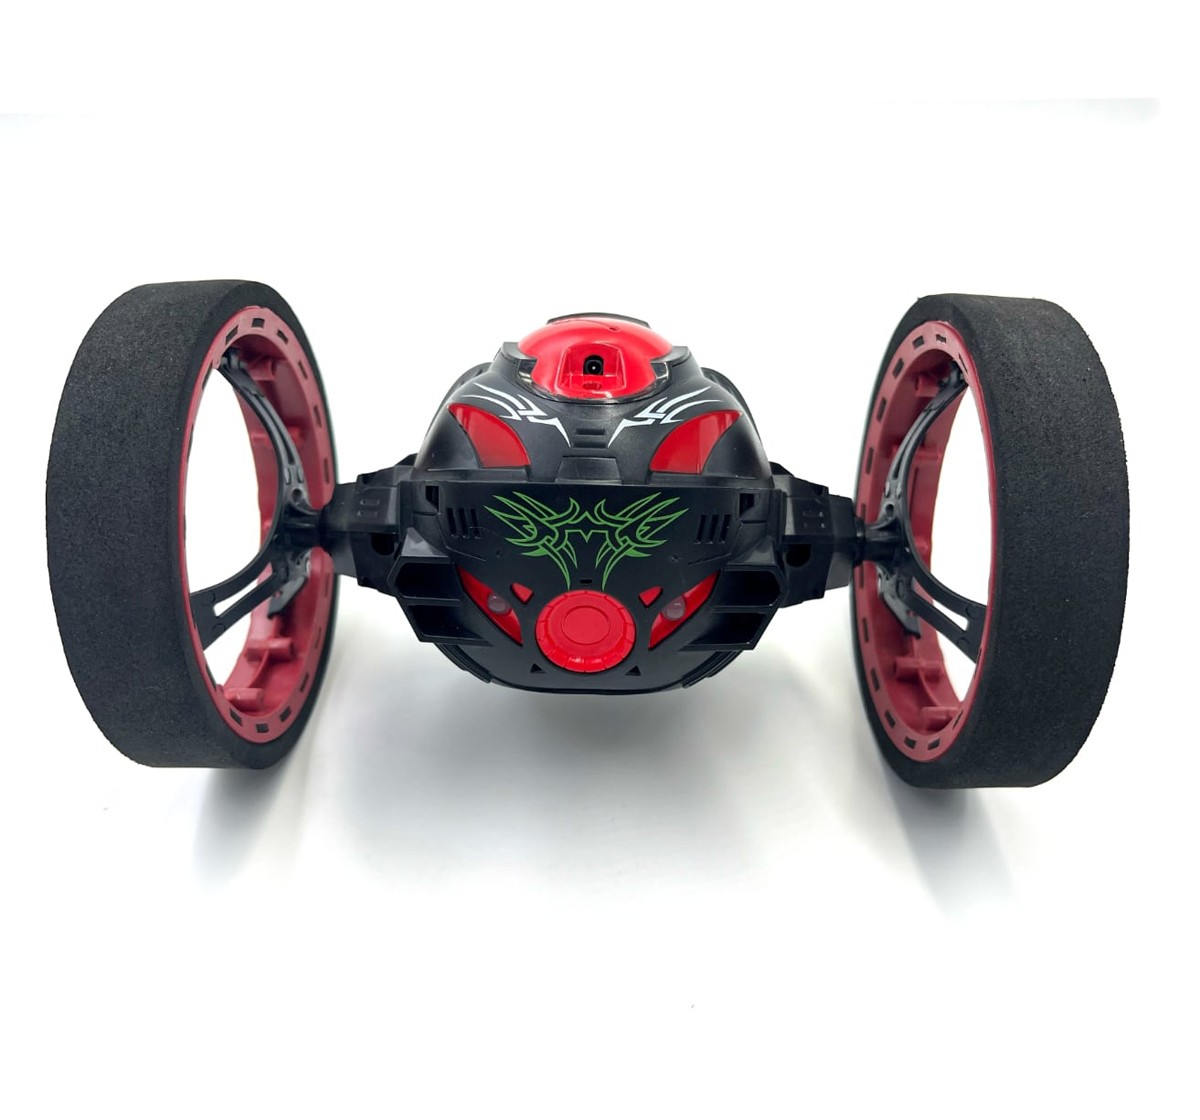 Ralleyz Remote Control Sumo Jumping Car, Bounce Car For Kids with LED Lights, 360 Degree Rotation and Music, Jumps Upto 80cm, Red, 6Y+